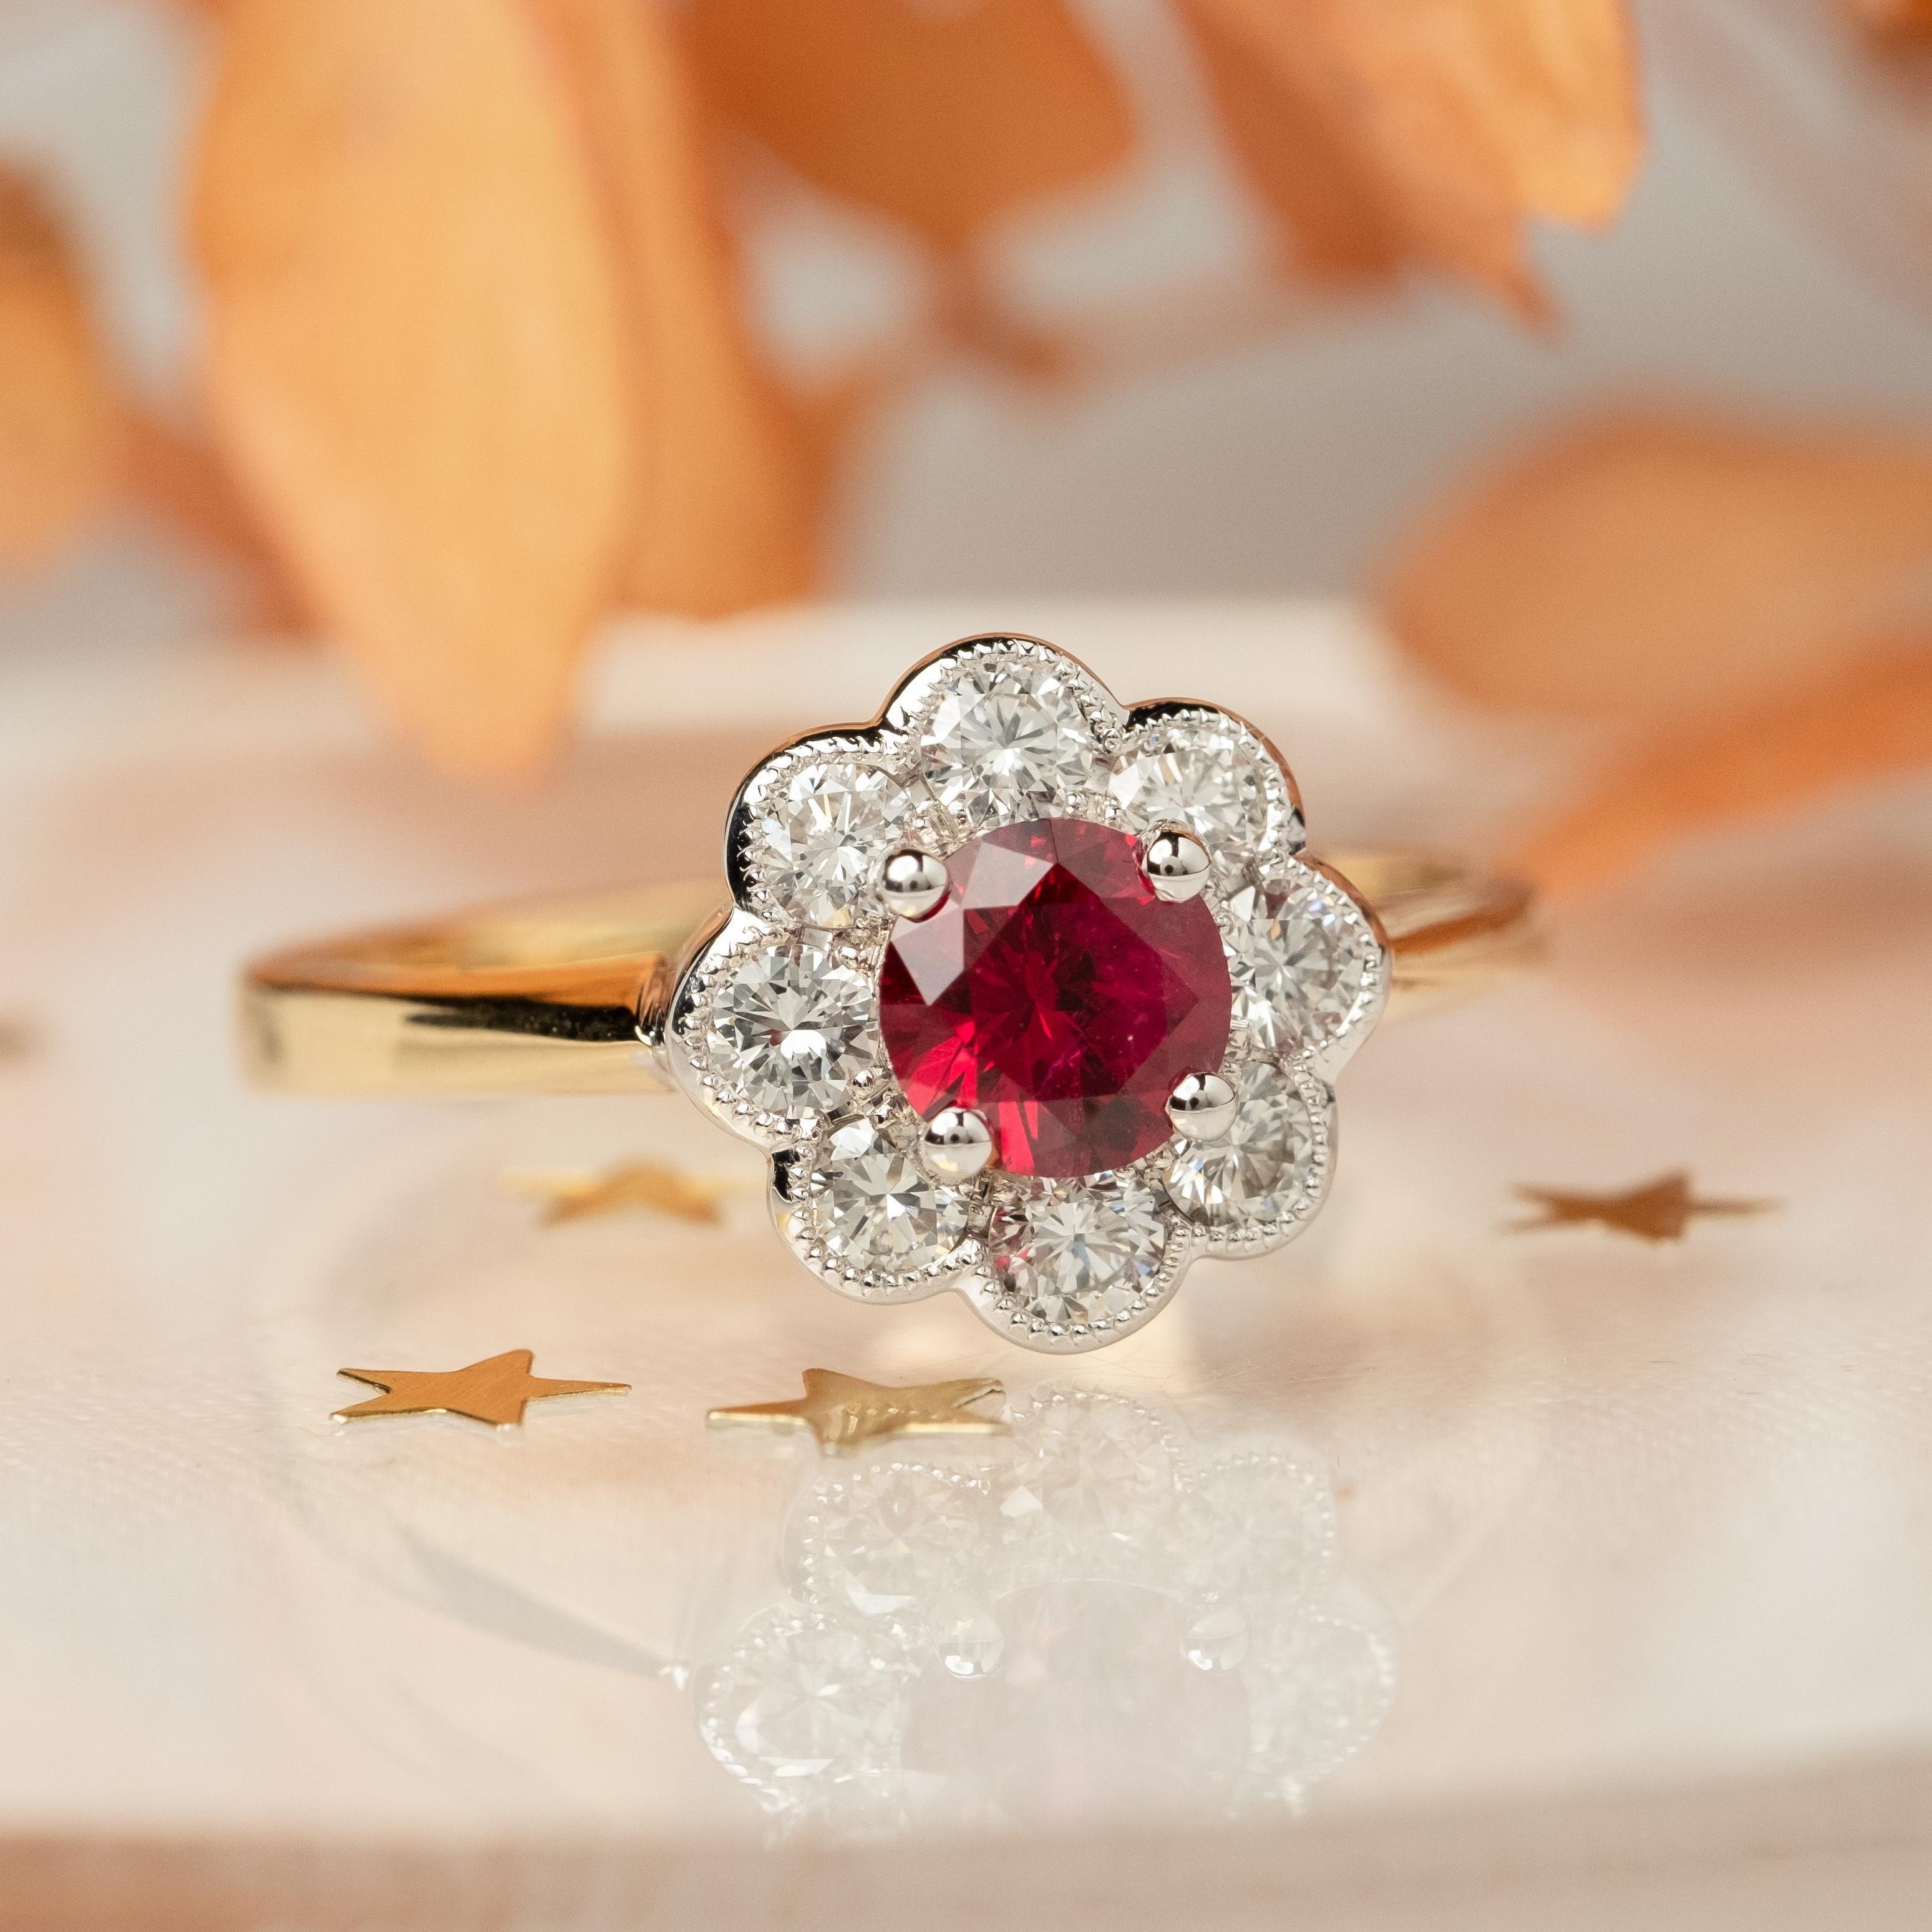 Ruby and Diamond  Cluster Ring

A classic design with a floral look, this ruby is of superior quality and vivid red in colour. 

An 18ct gold round ruby deep red in colour set in a four claw setting.
Surrounded by 8 round brilliant cut natural mined